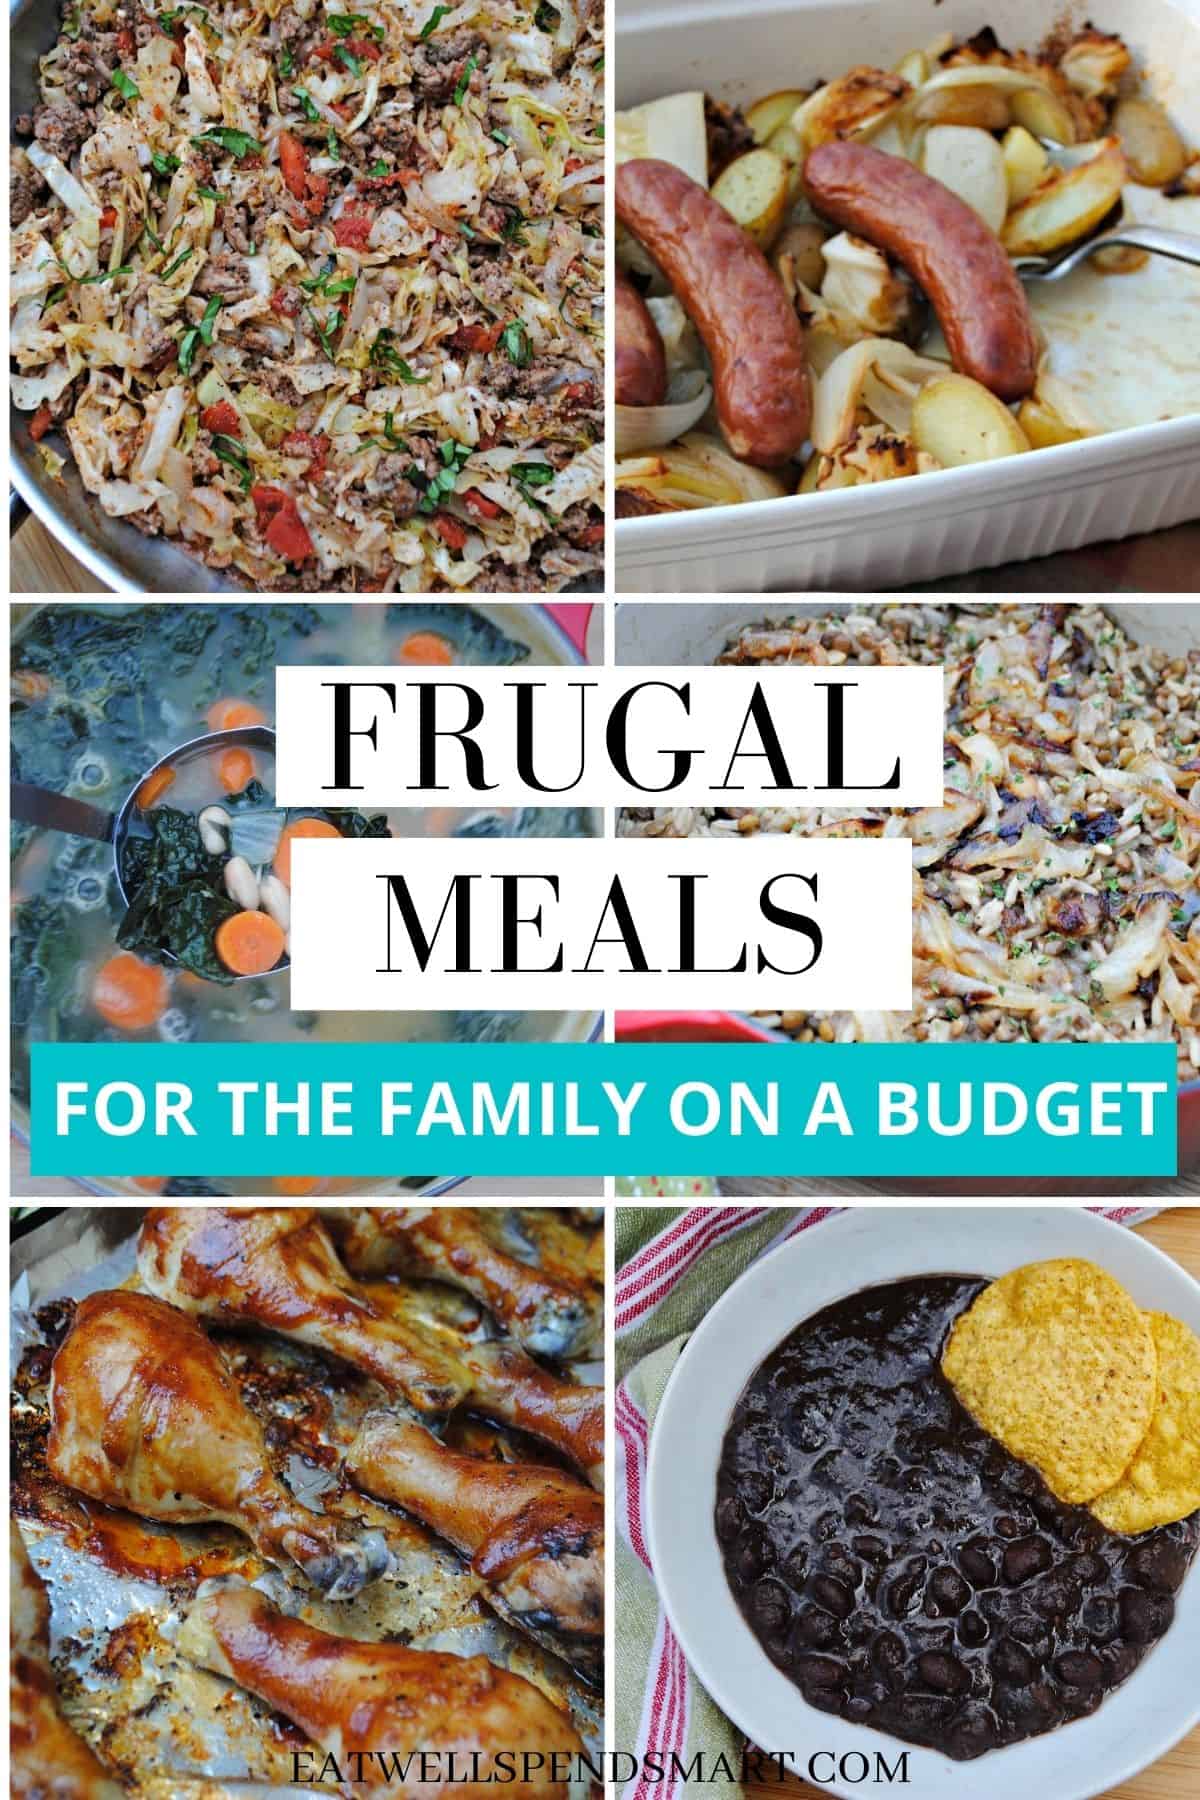 Frugal eating ideas